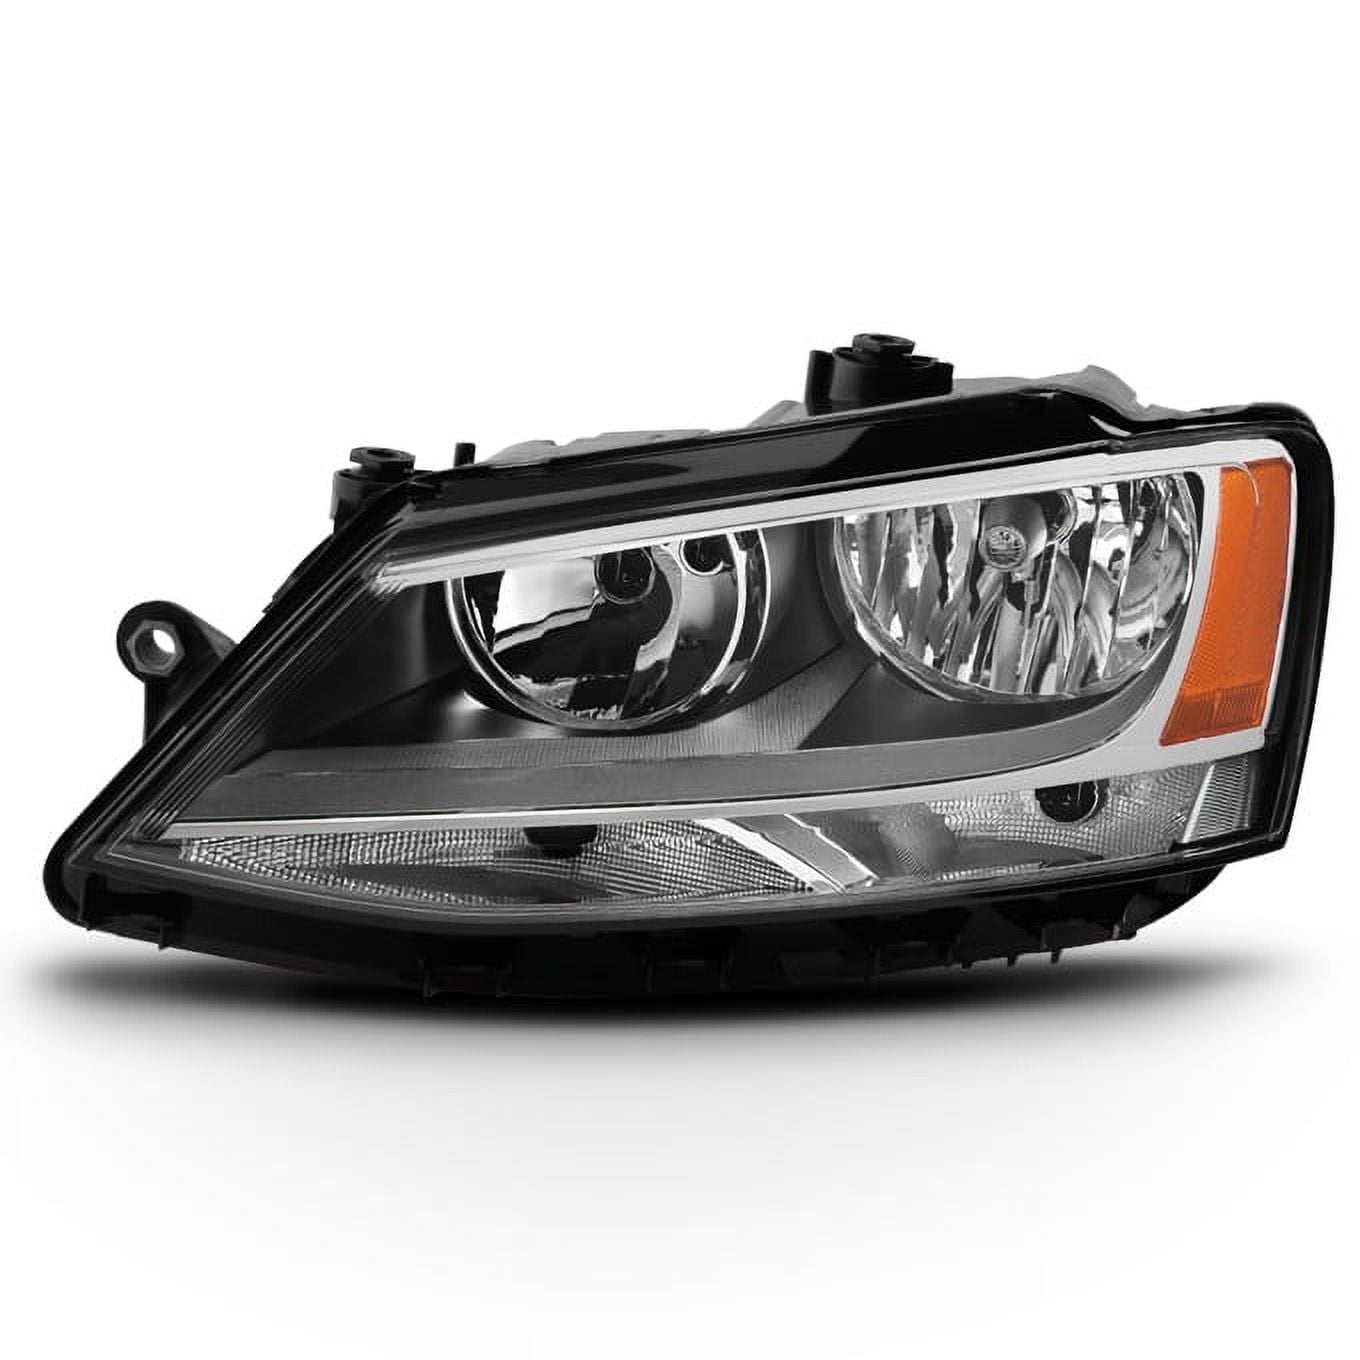 AKKON - For 2015-2019 VW GTI Golf Models Driver Side Only Halogen  Headlights Assembly Chrome Housing Clear Lens